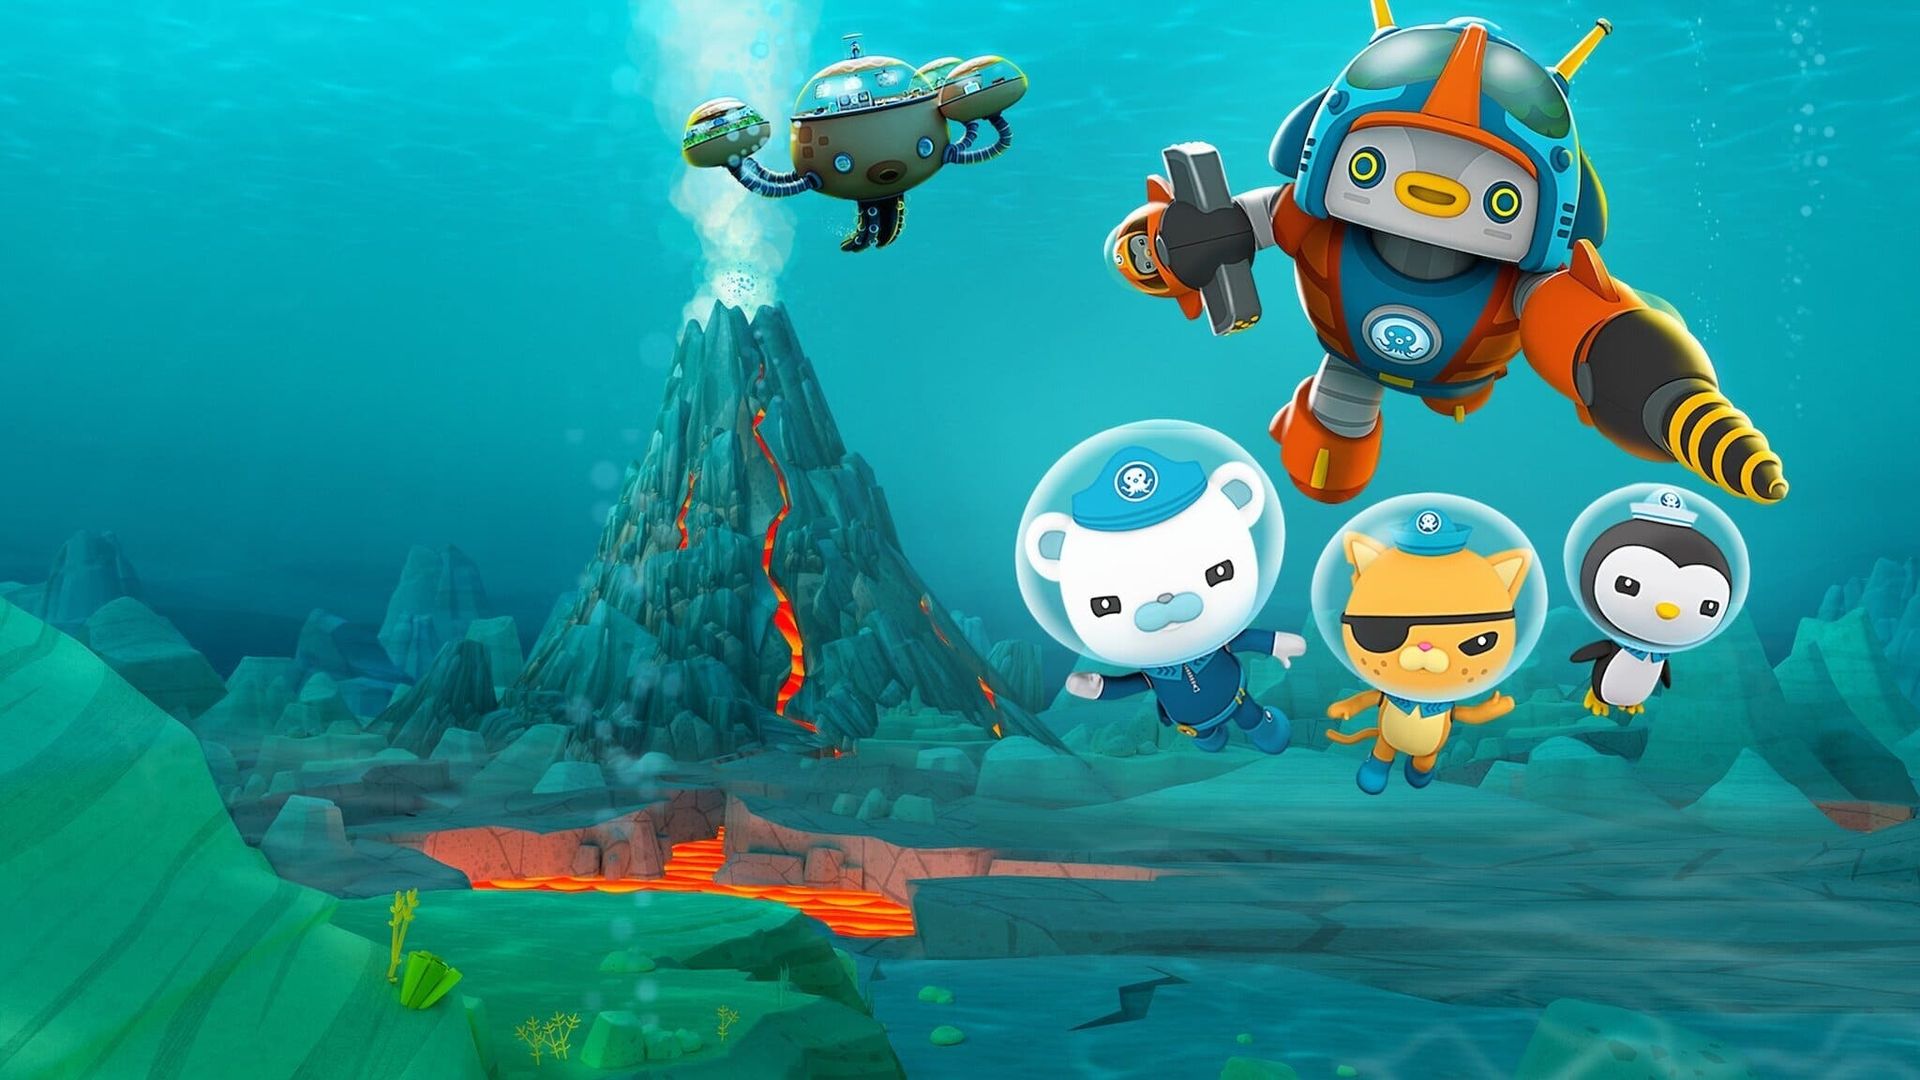 Octonauts: The Ring of Fire background